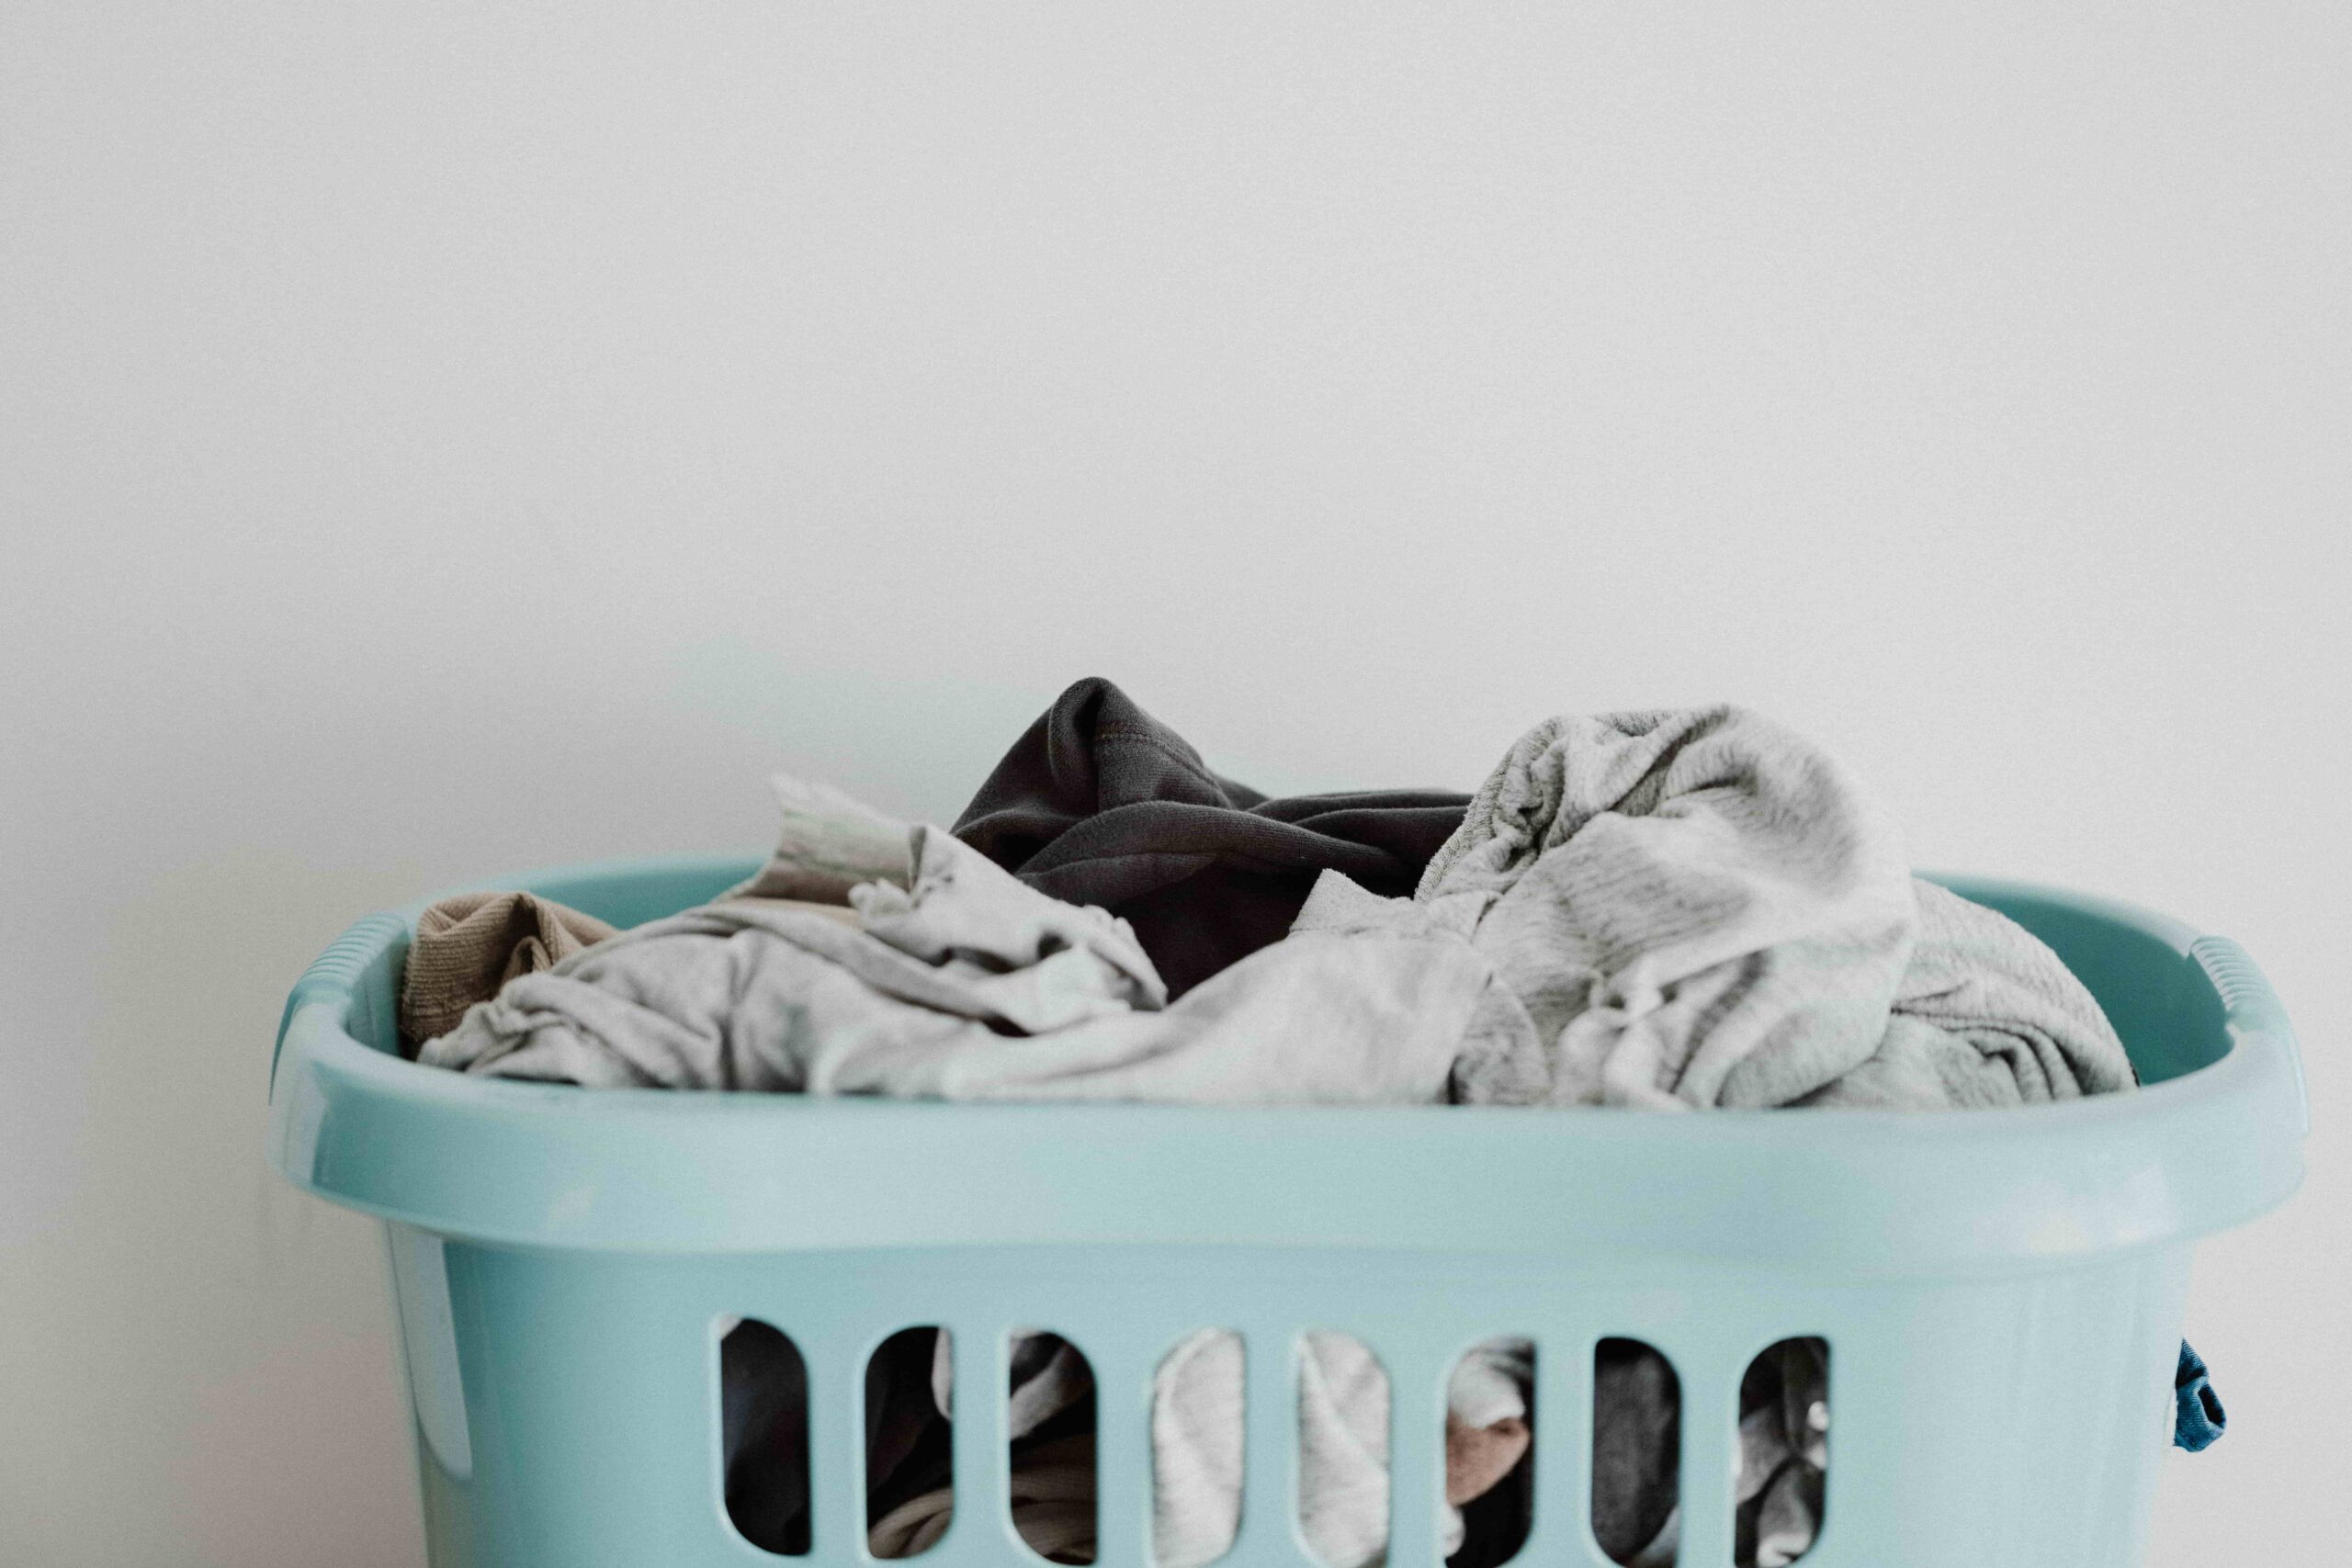 How To Know If It’s Time To Toss Out Your Old Clothes?